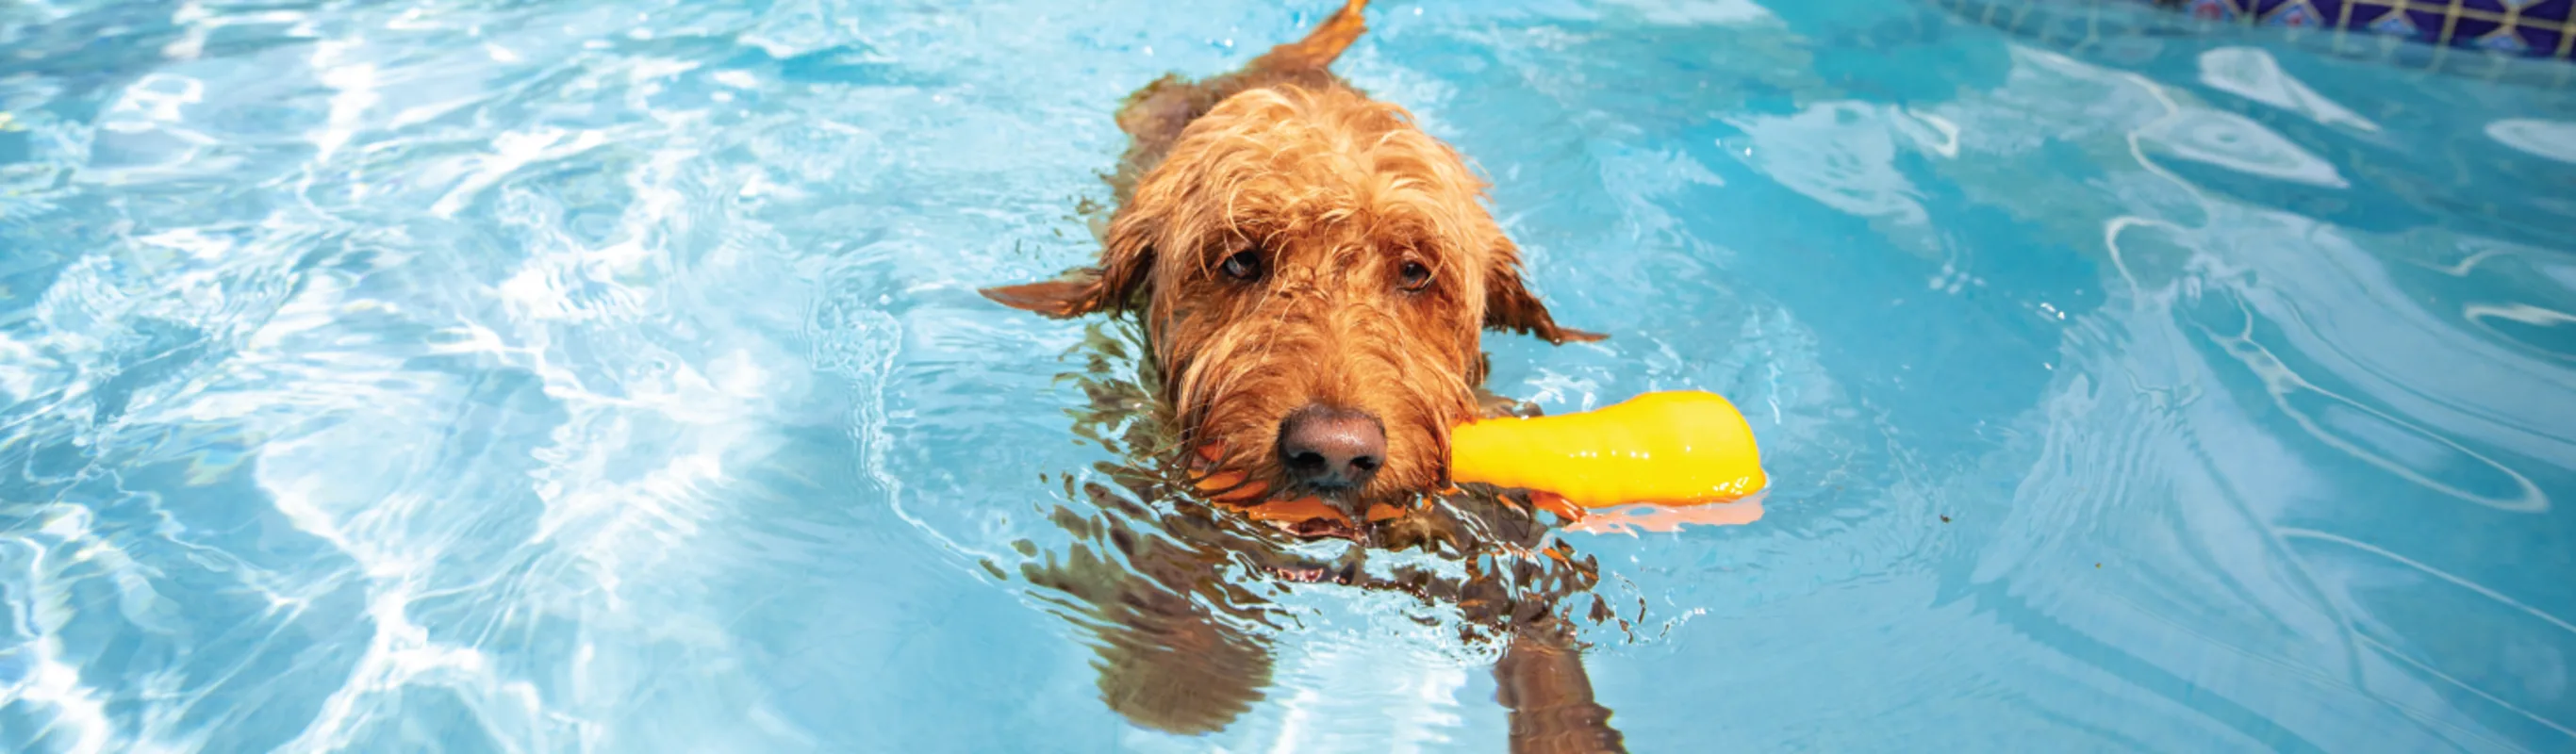 Dog in pool with toy in mouth